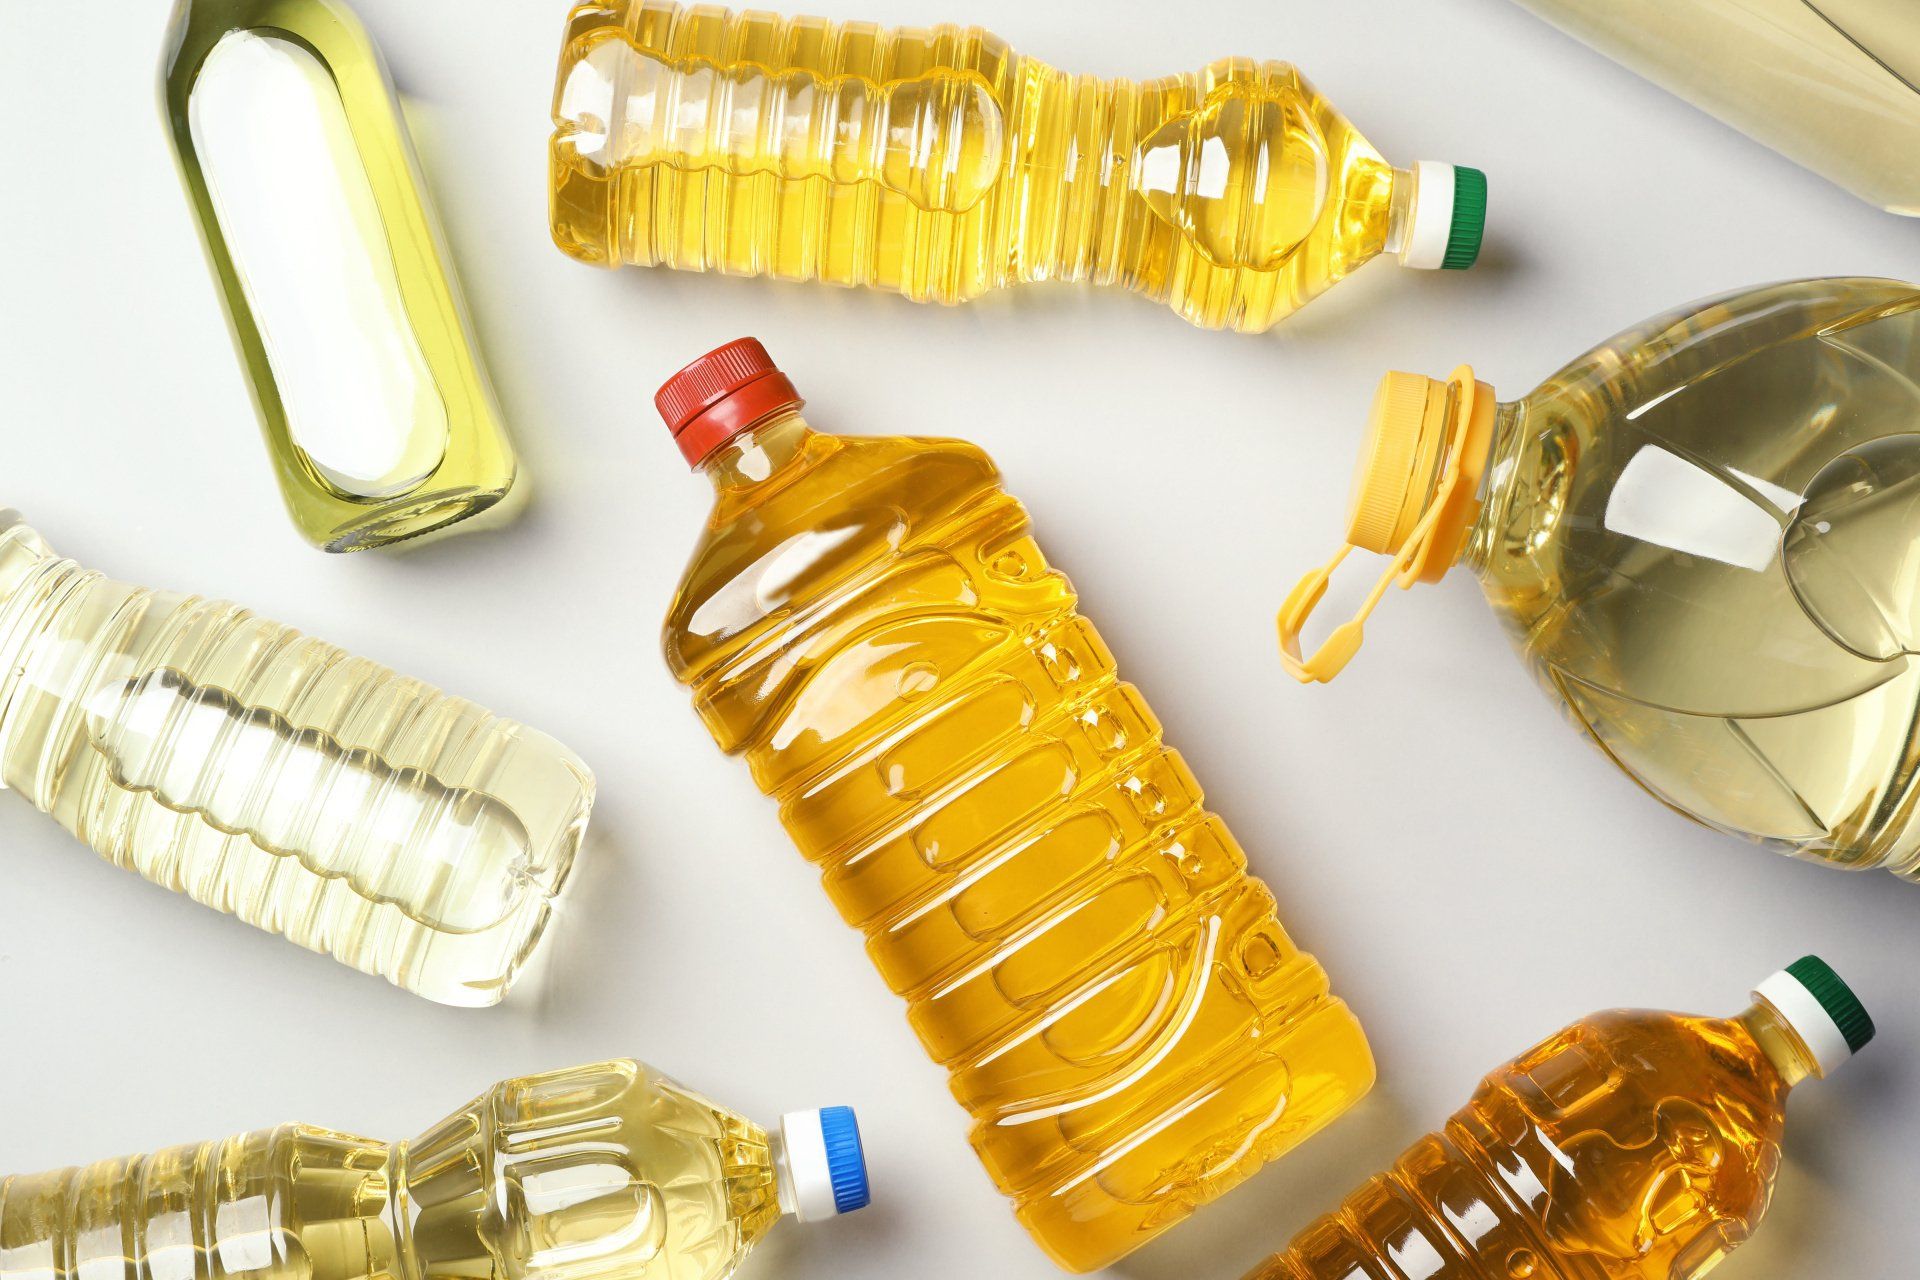 There are many different types of oil in plastic bottles.